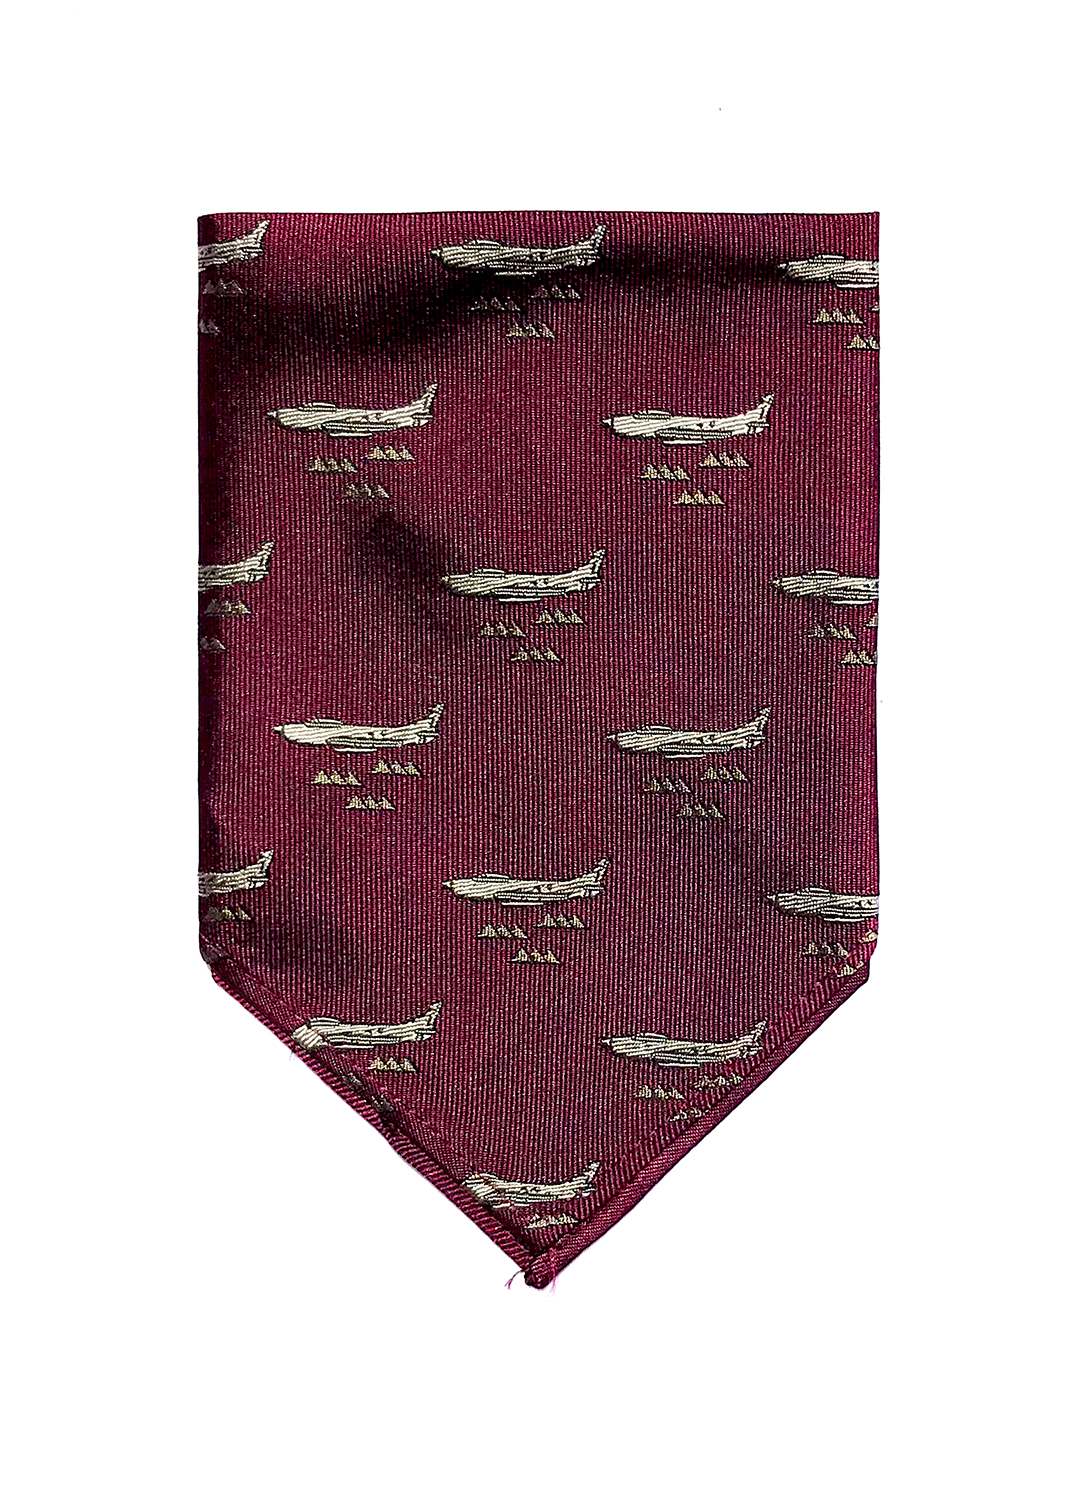 F-86 Sabre pocket square in plum red